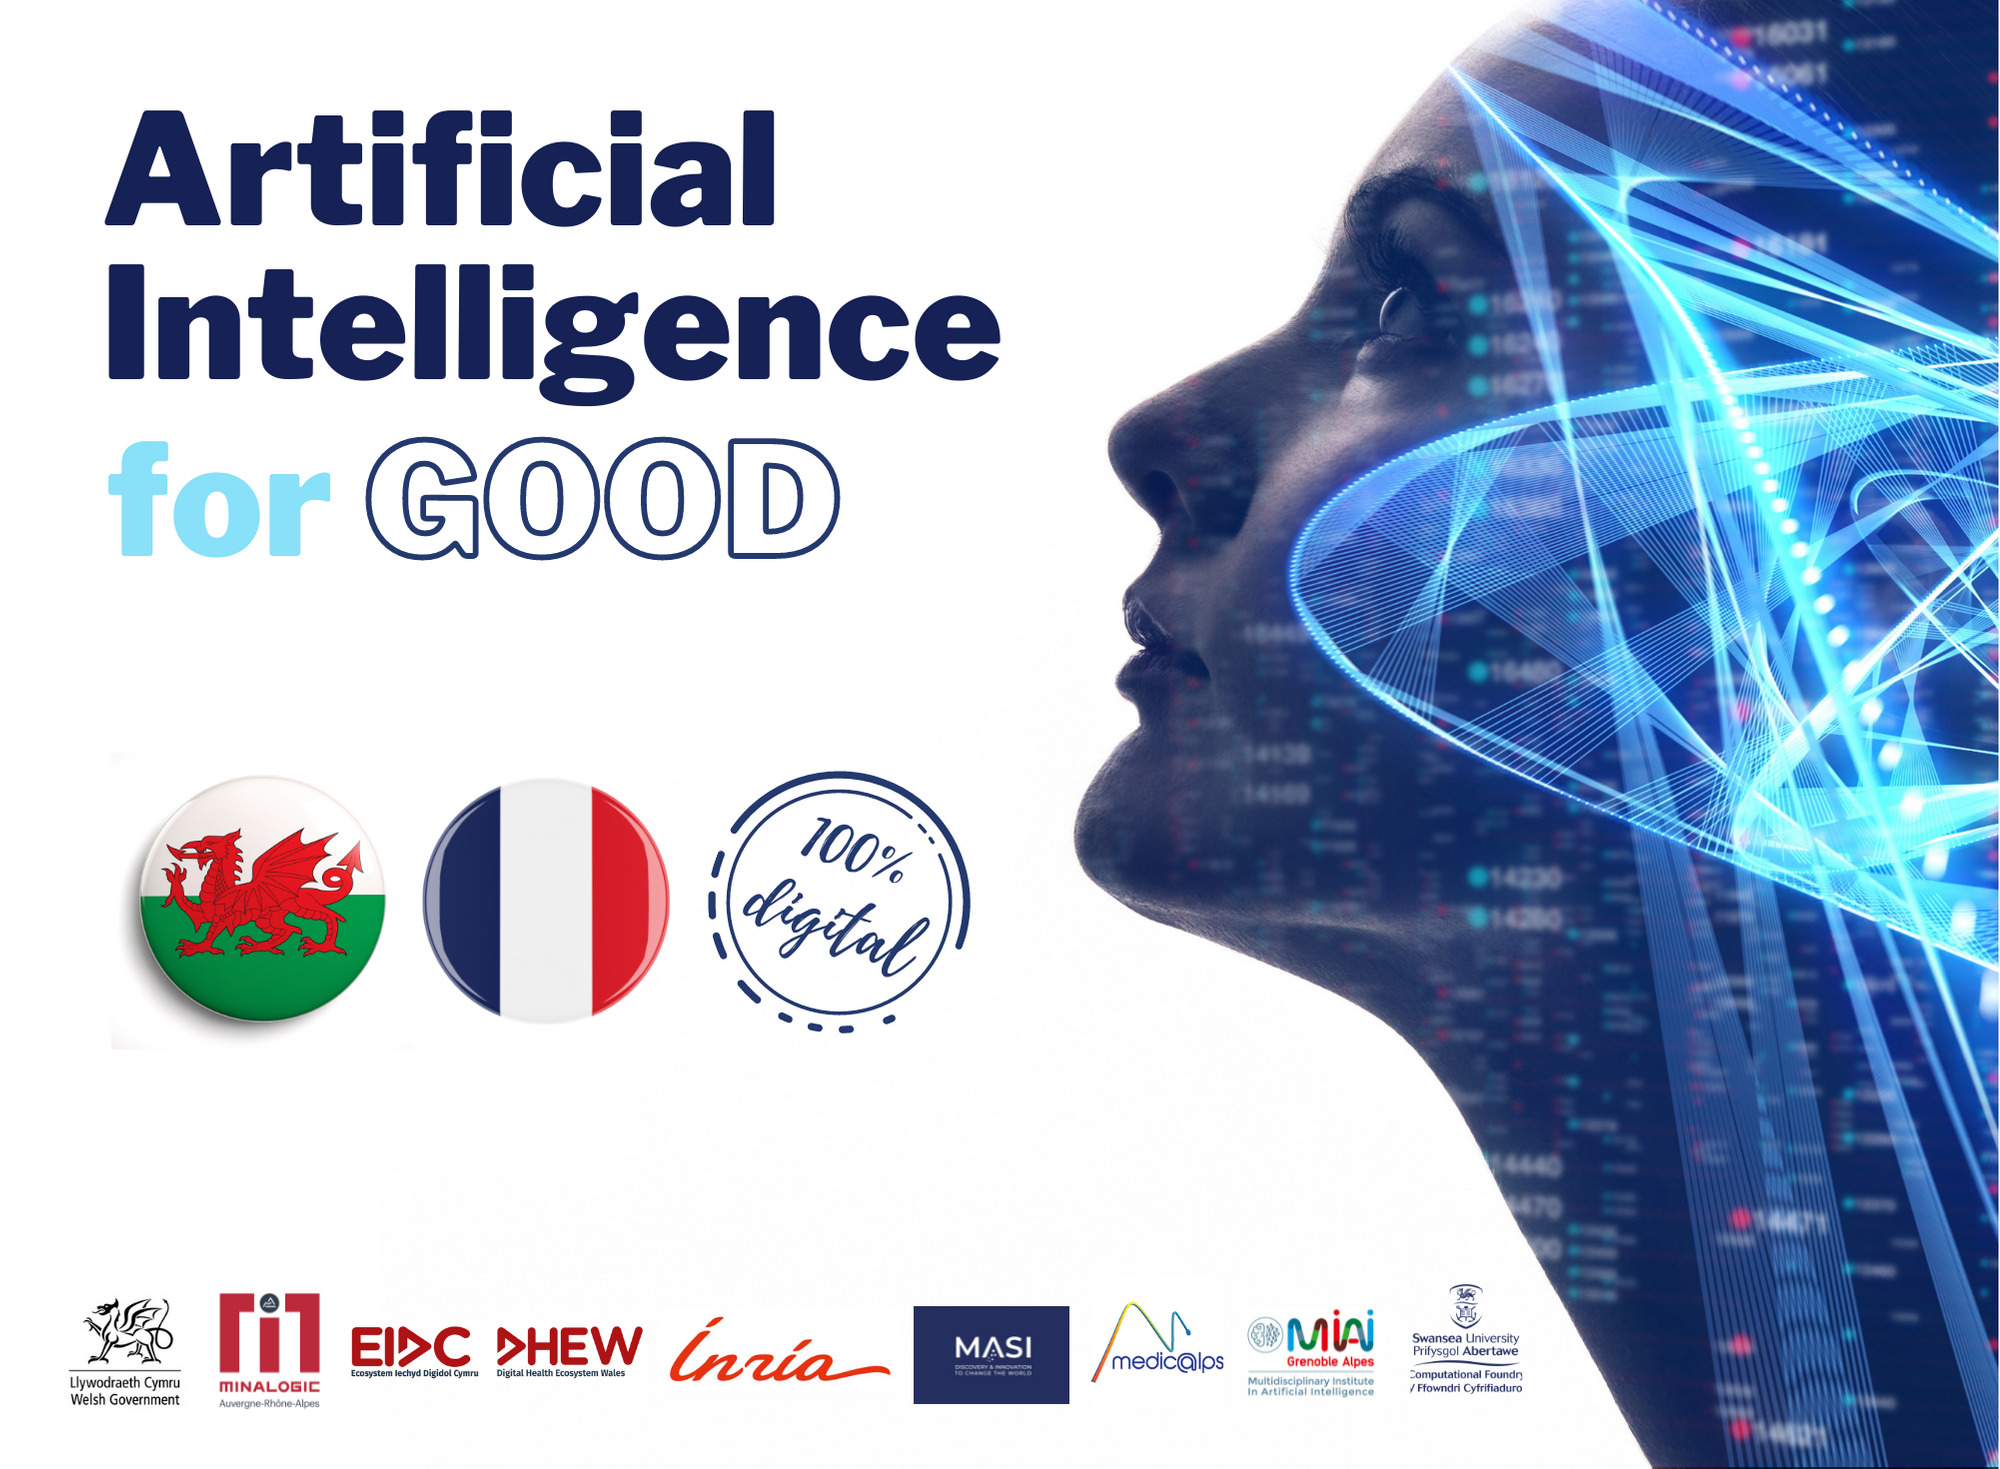 Artificial Intelligence for good